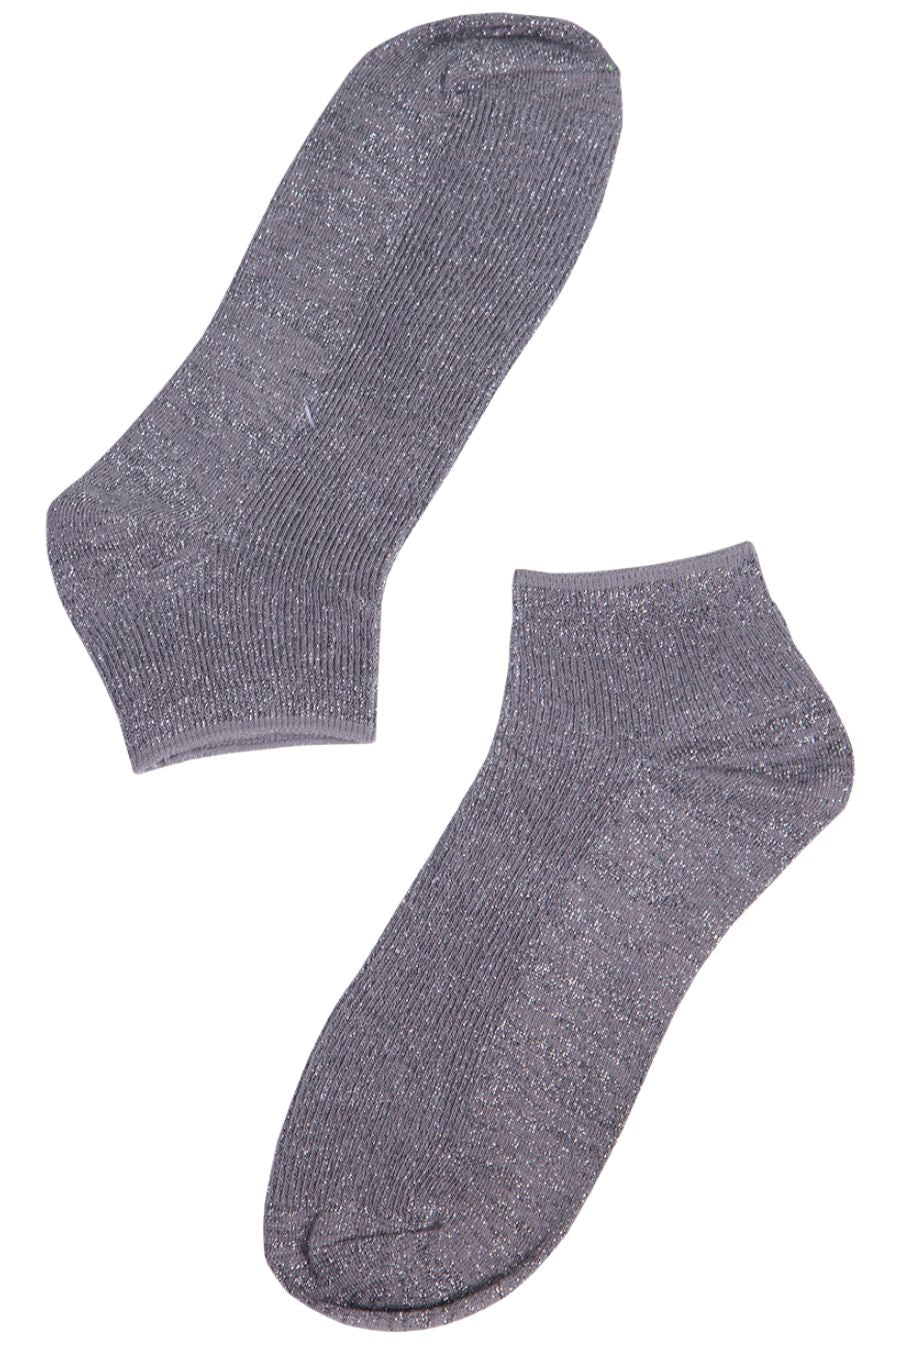 grey and silver glitter womens anklet socks